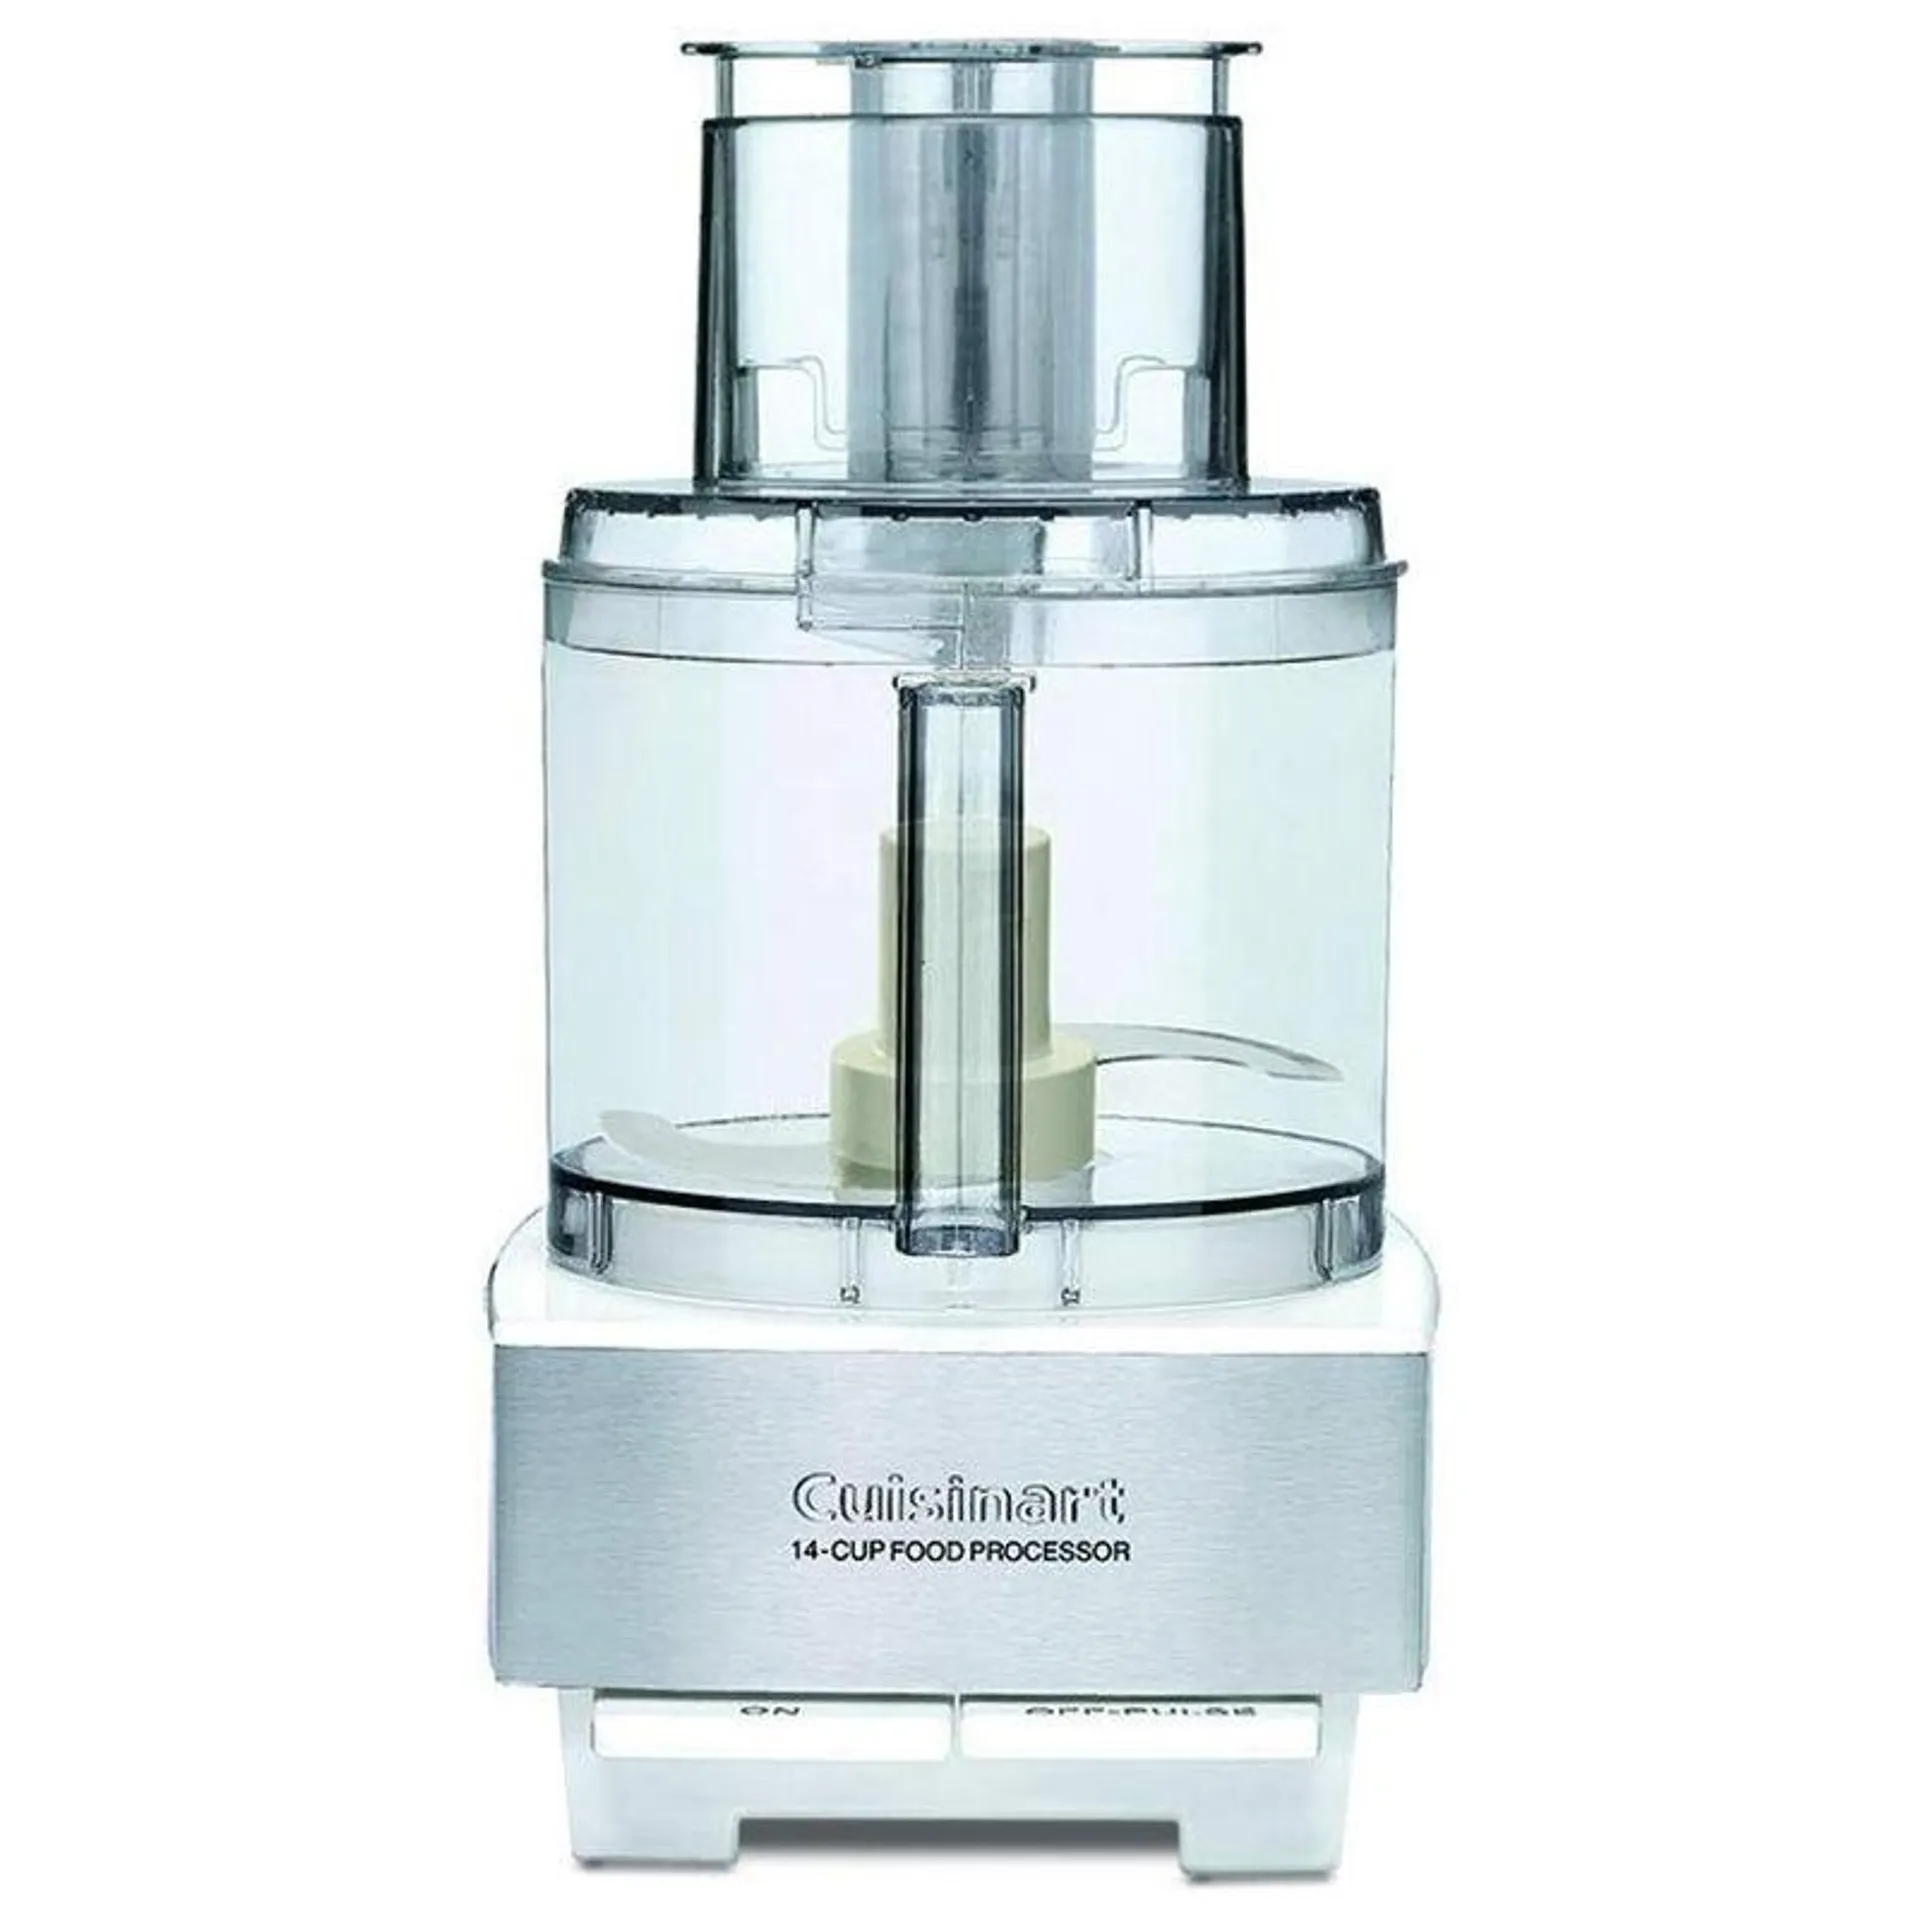 Cuisinart Large 14-Cup Food Processor-White